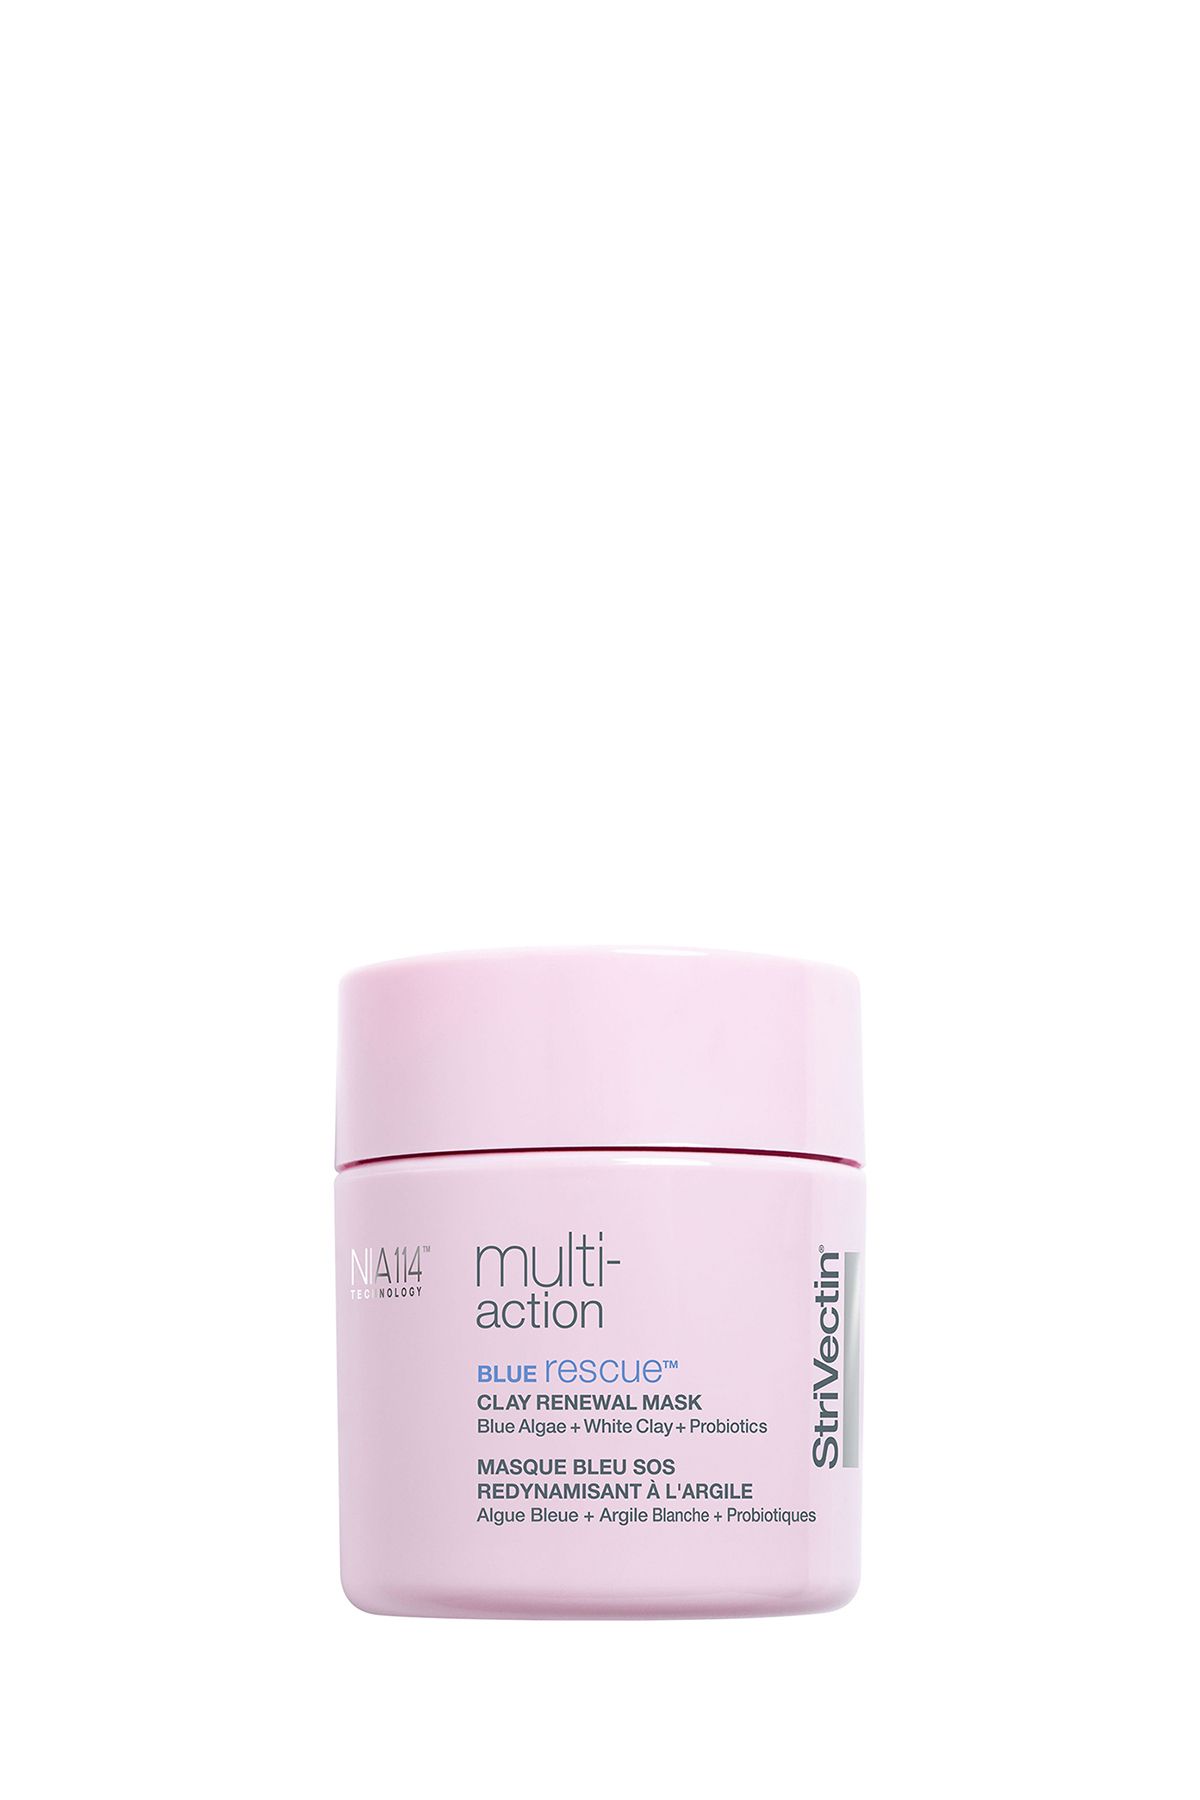 Strivectin Multi Action Blue Rescue Clay Renewal Mask 94 G